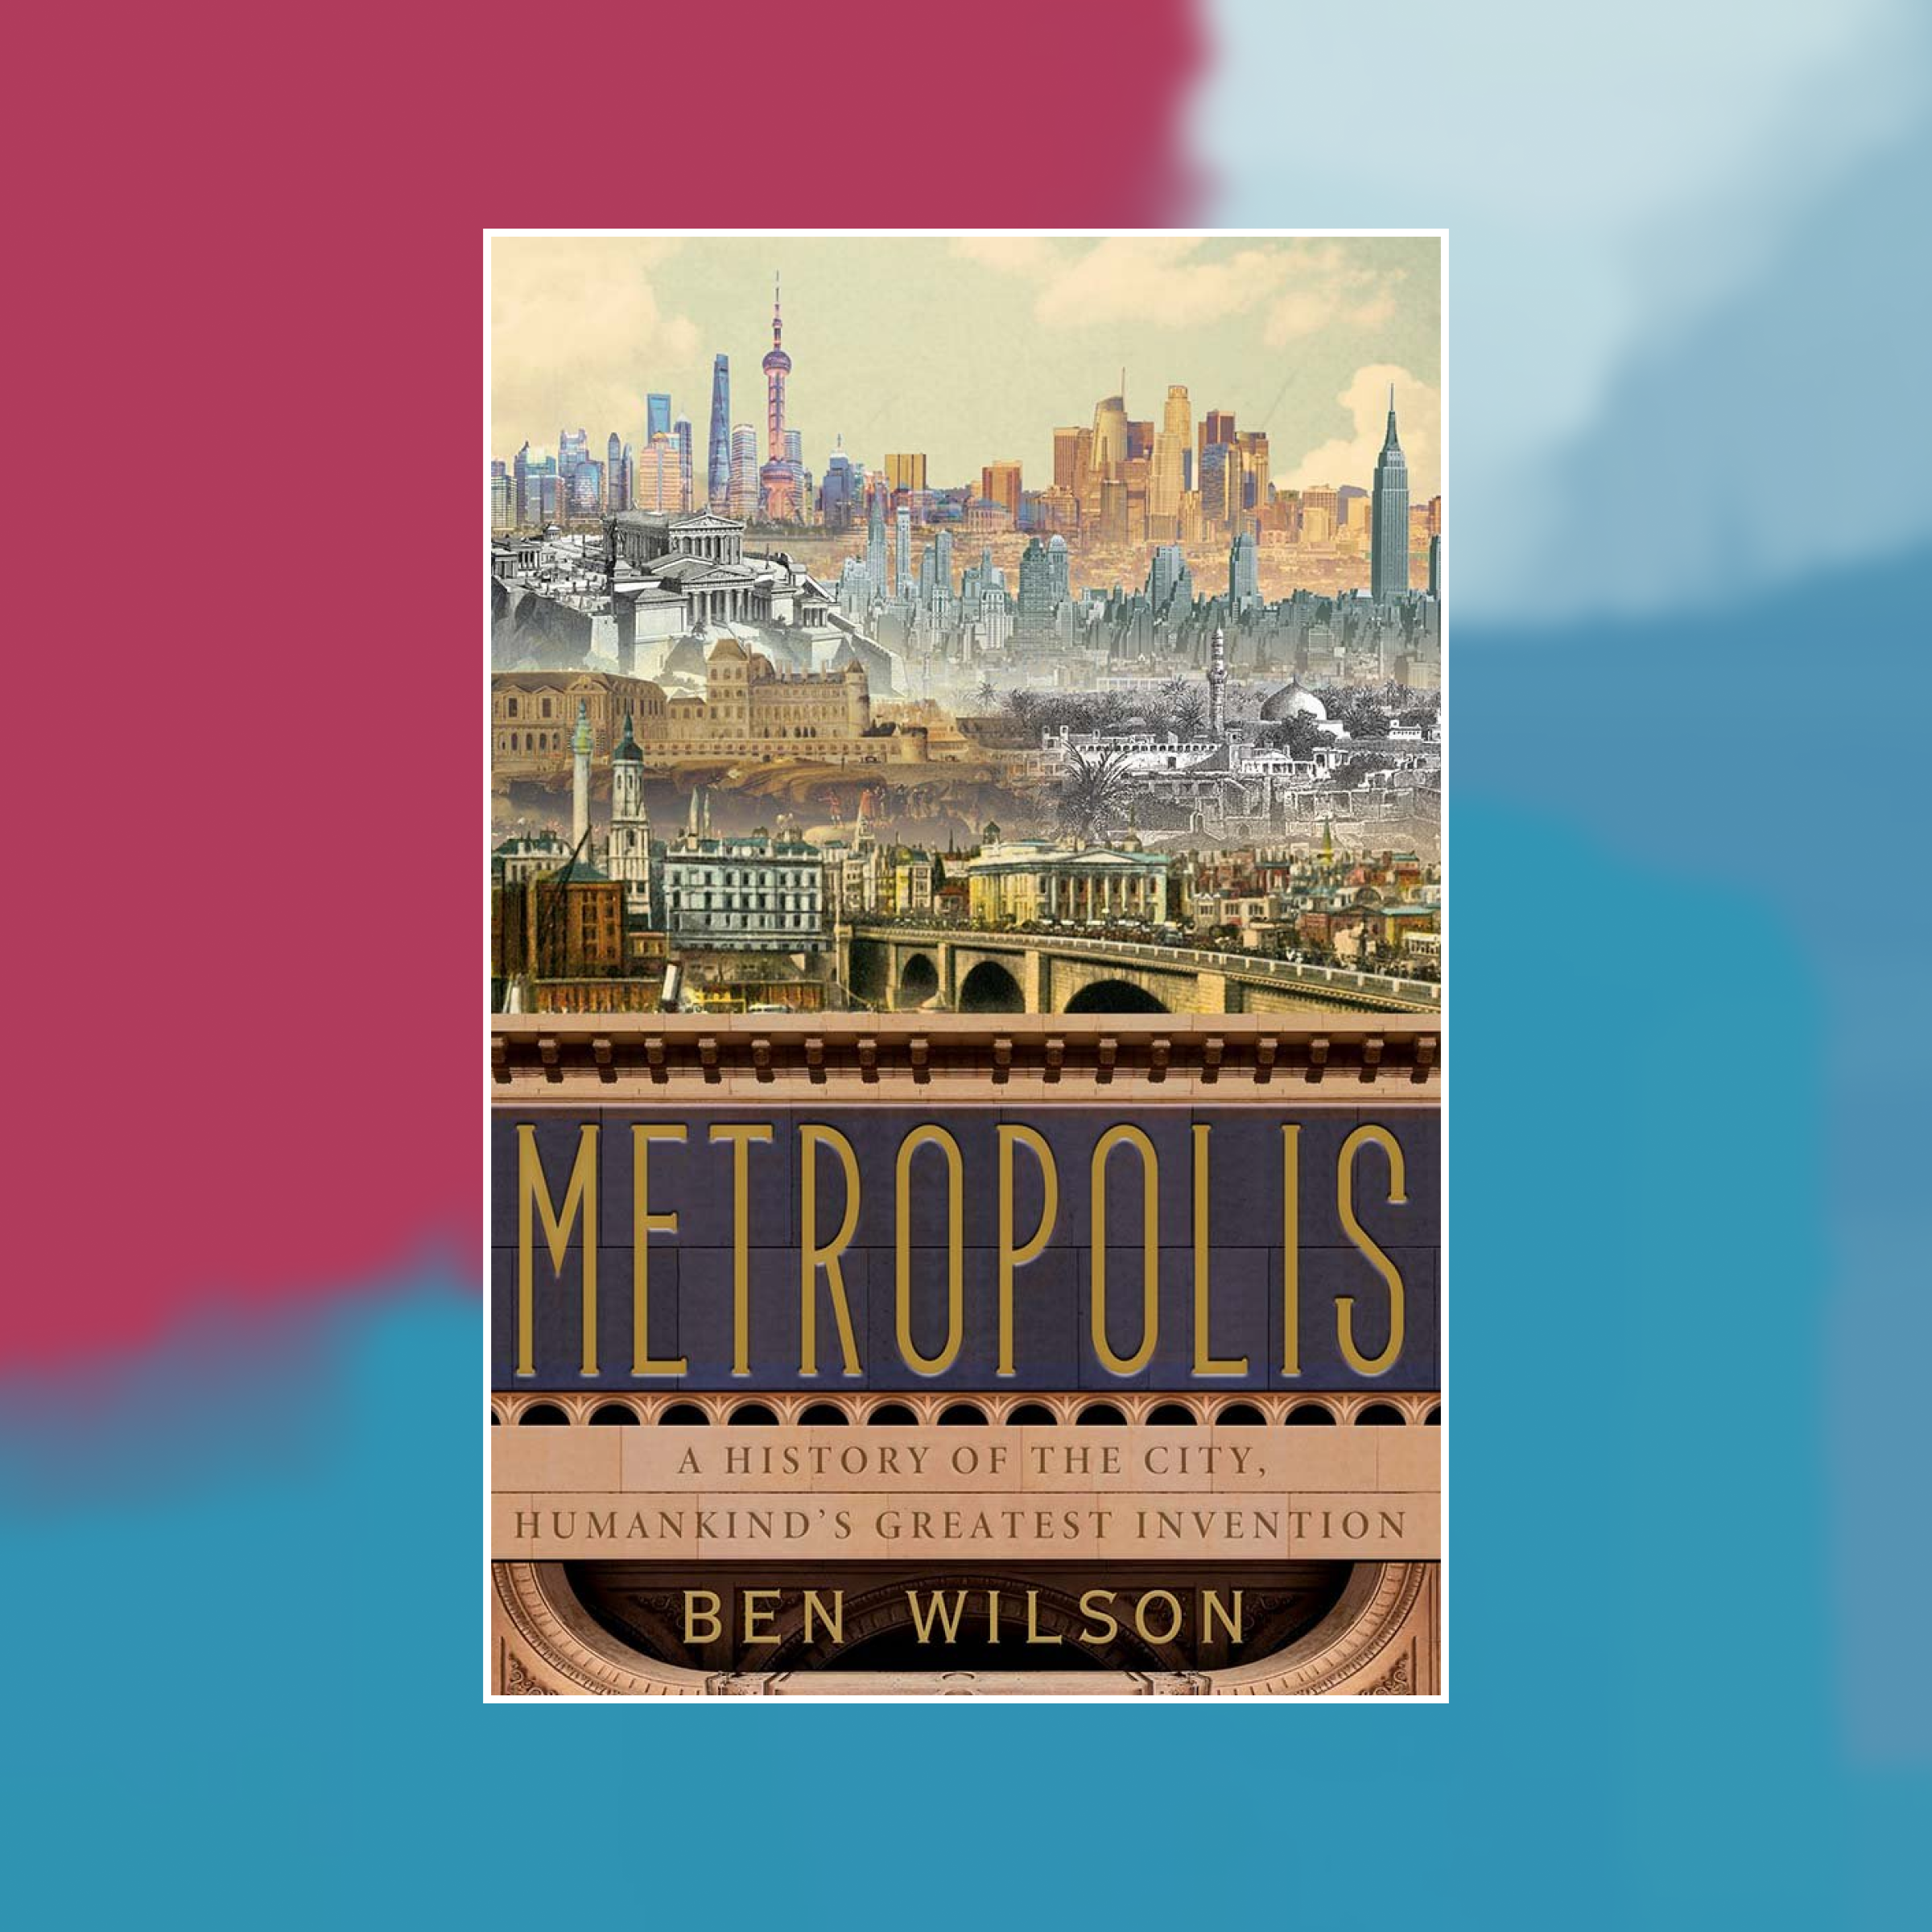 Book cover of Metropolis against a painted background